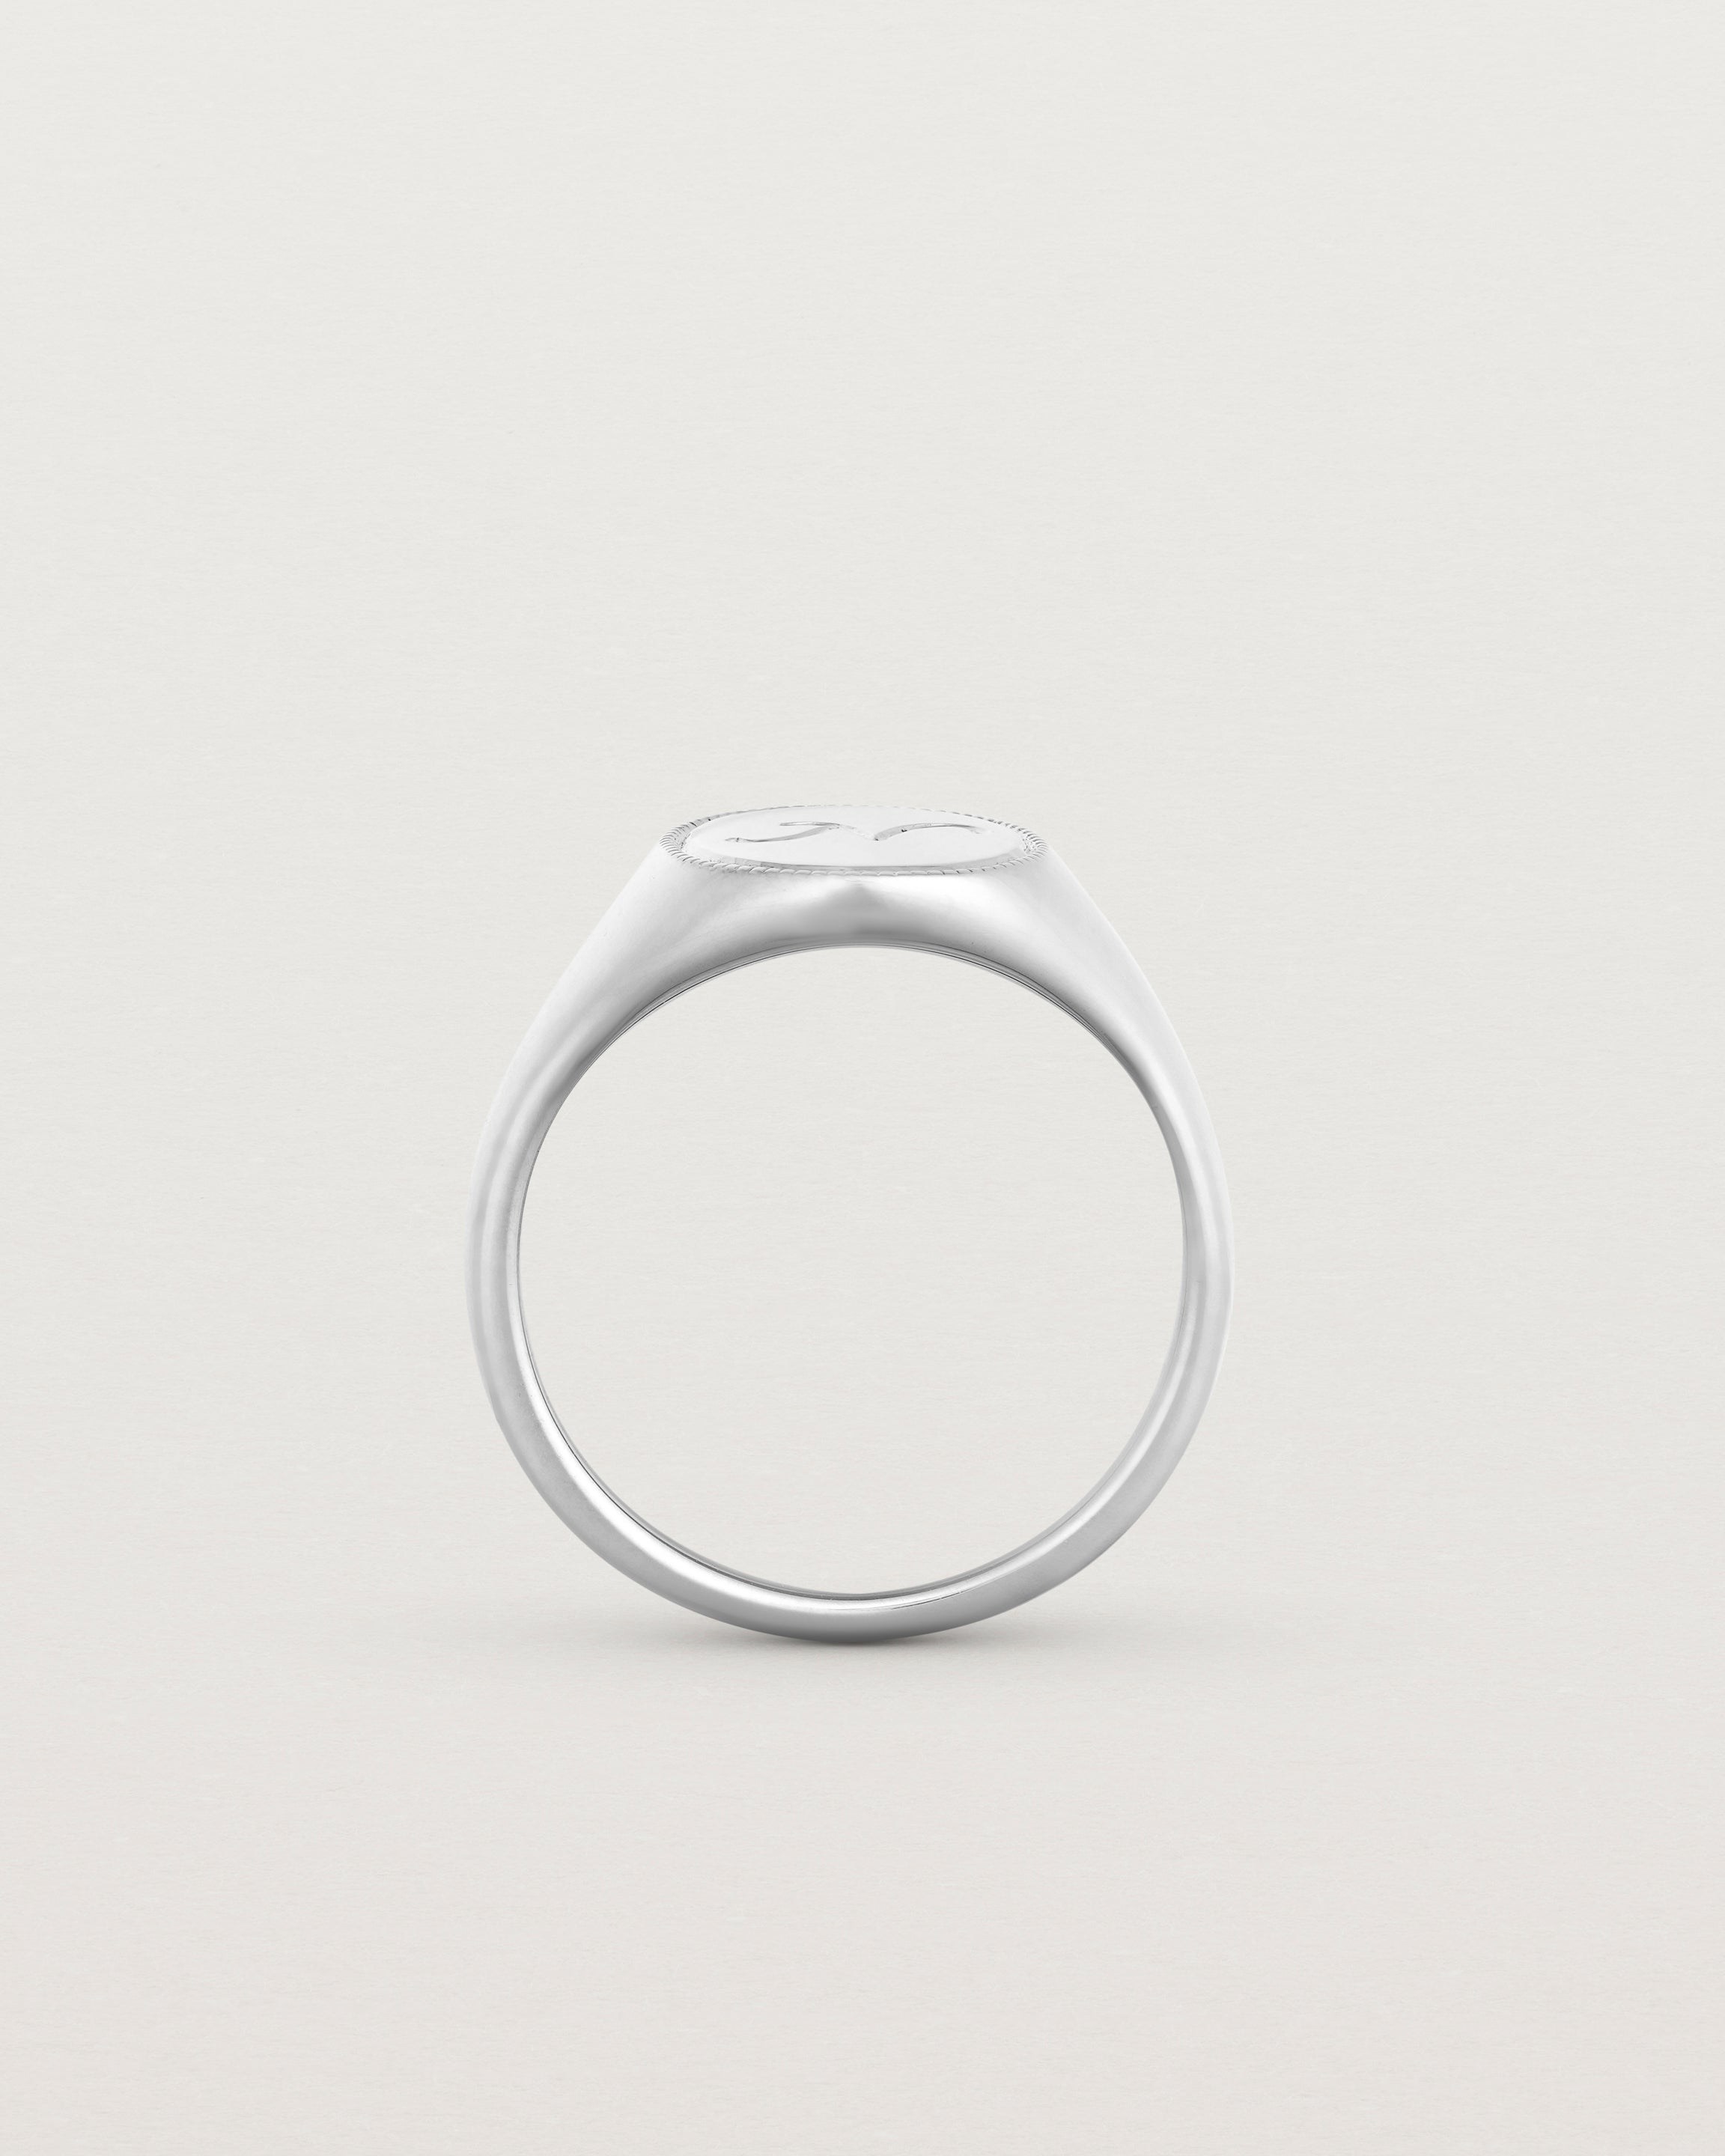 Standing view of the Arden Signet Ring | Millgrain in sterling silver.